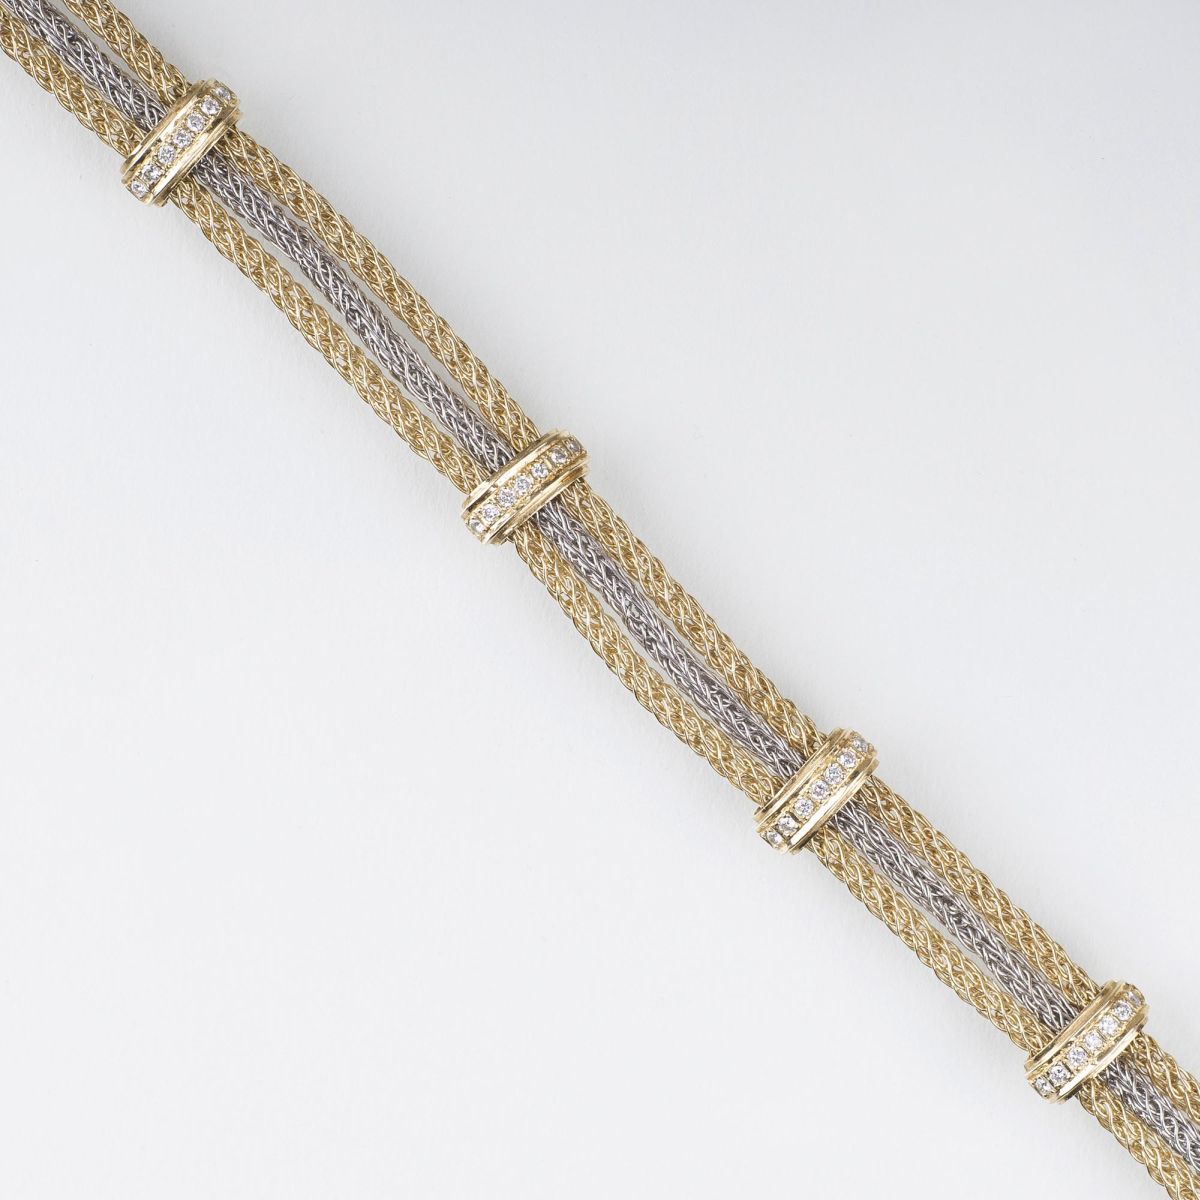 A two-coloured Gold Bracelet with Diamonds